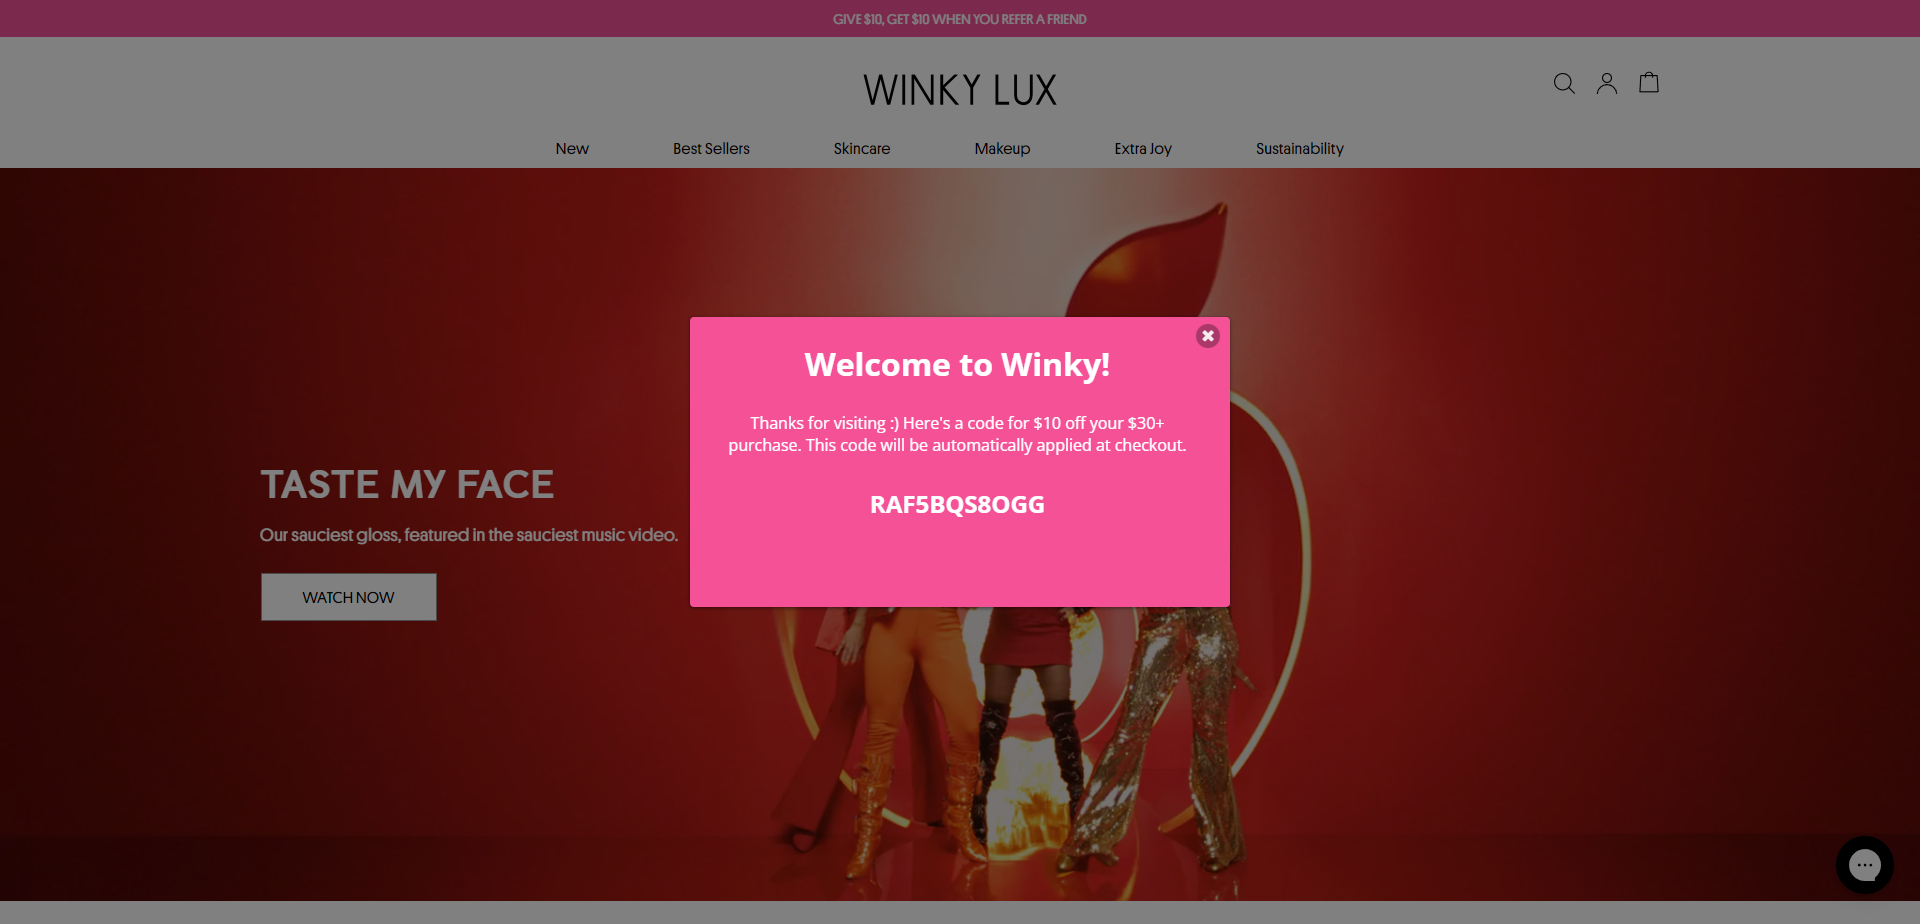 Landing Page for Winky Lux